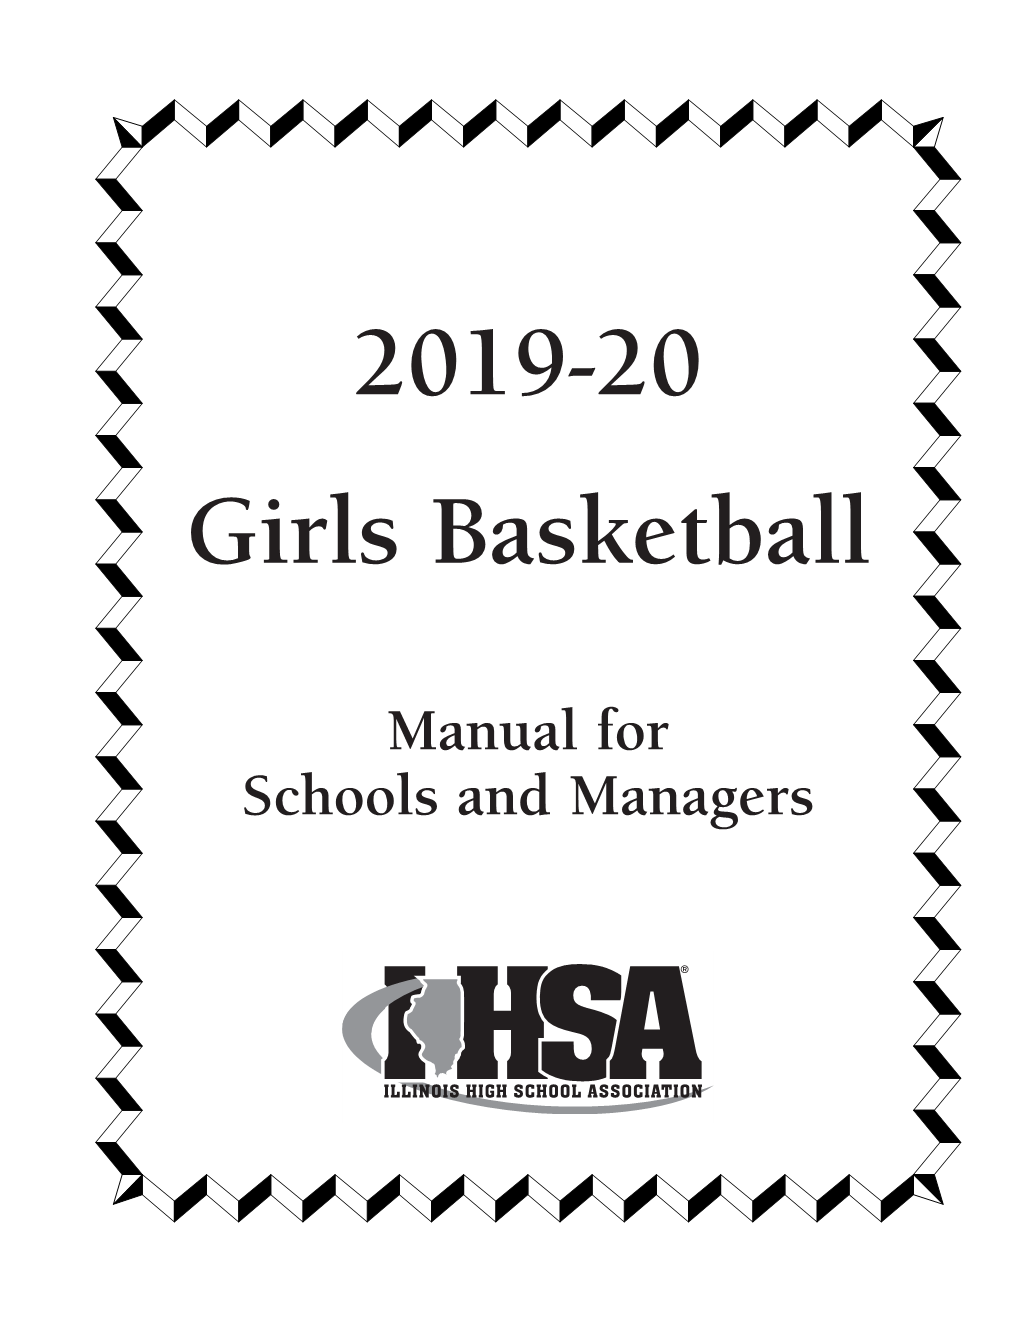 GIRLS BASKETBALL MANUAL — Table of Contents